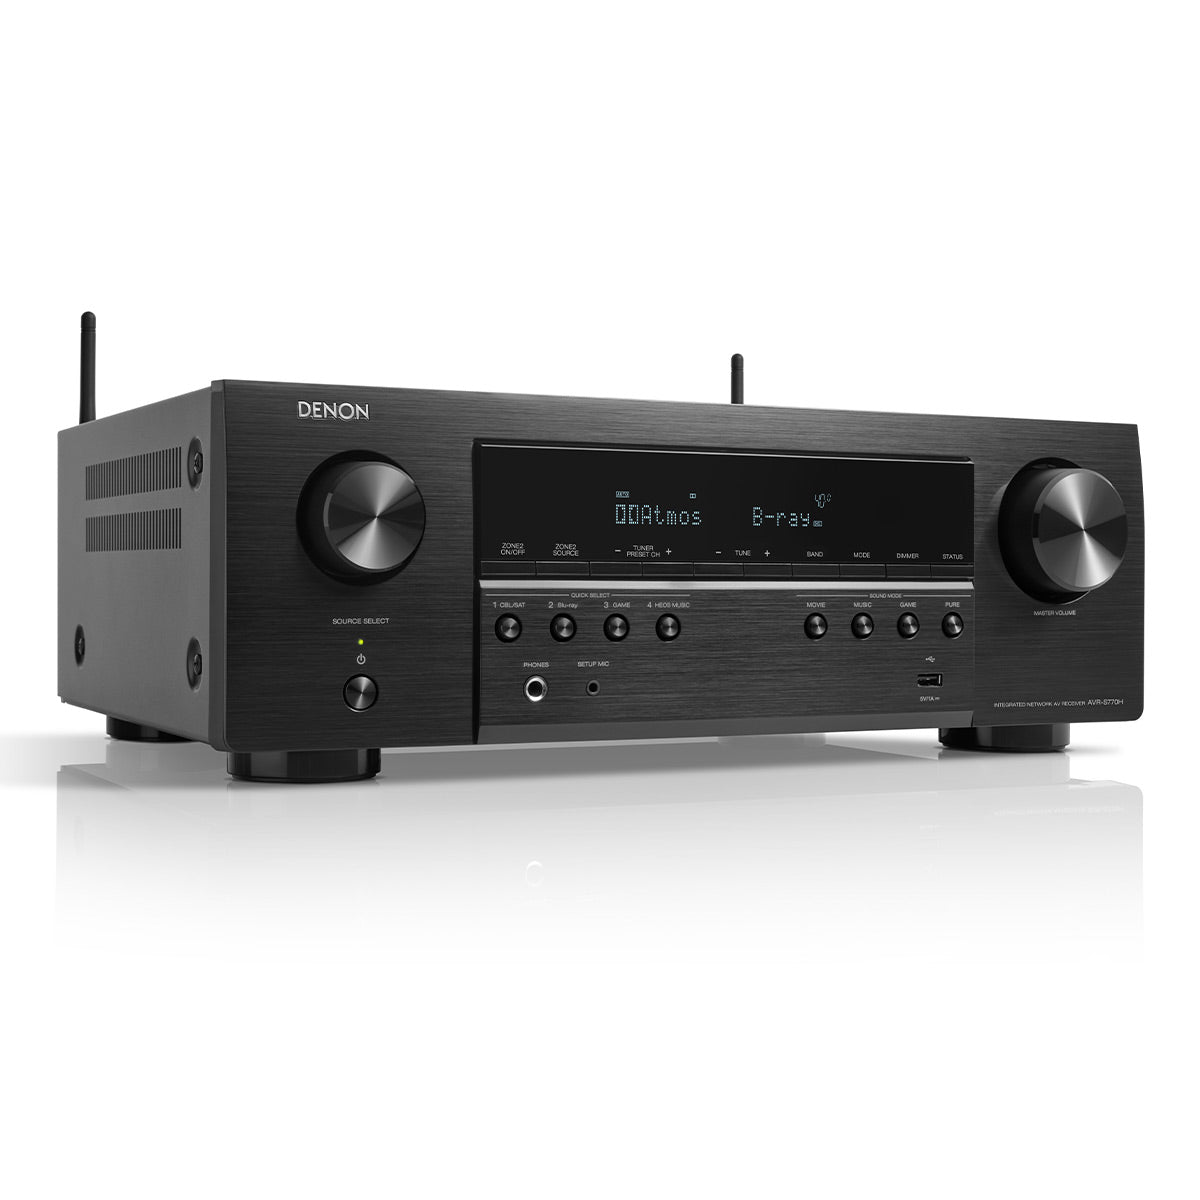 Denon AVR-S770H 7.2 Channel 8K Home Theater Receiver with Dolby Atmos, HDR10+, and HEOS Built-In